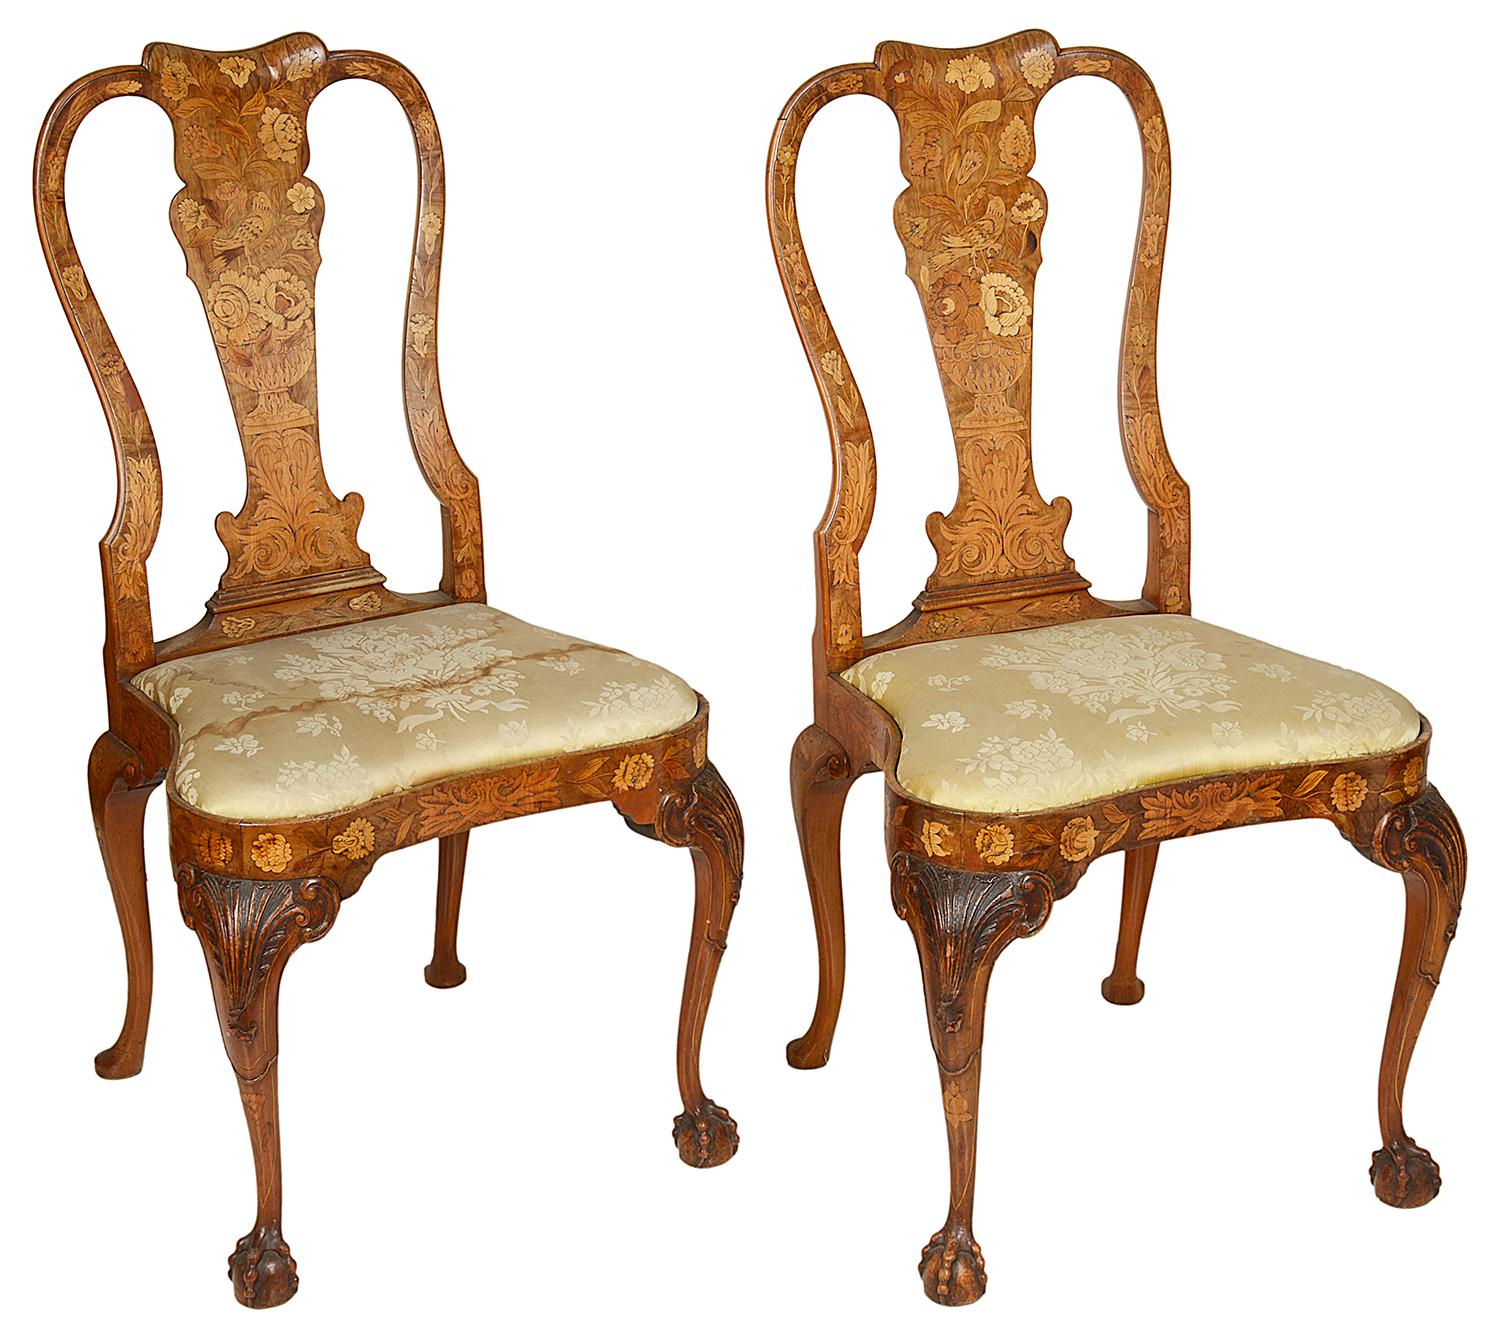 A fine quality set of four, 18th century Dutch marquetry side chairs. Each with wonderful inlaid decoration, depicting flowers, birds and leaves to the back rest, frieze and legs. Drop in upholstered seats and raised on beautifully carved cabriole